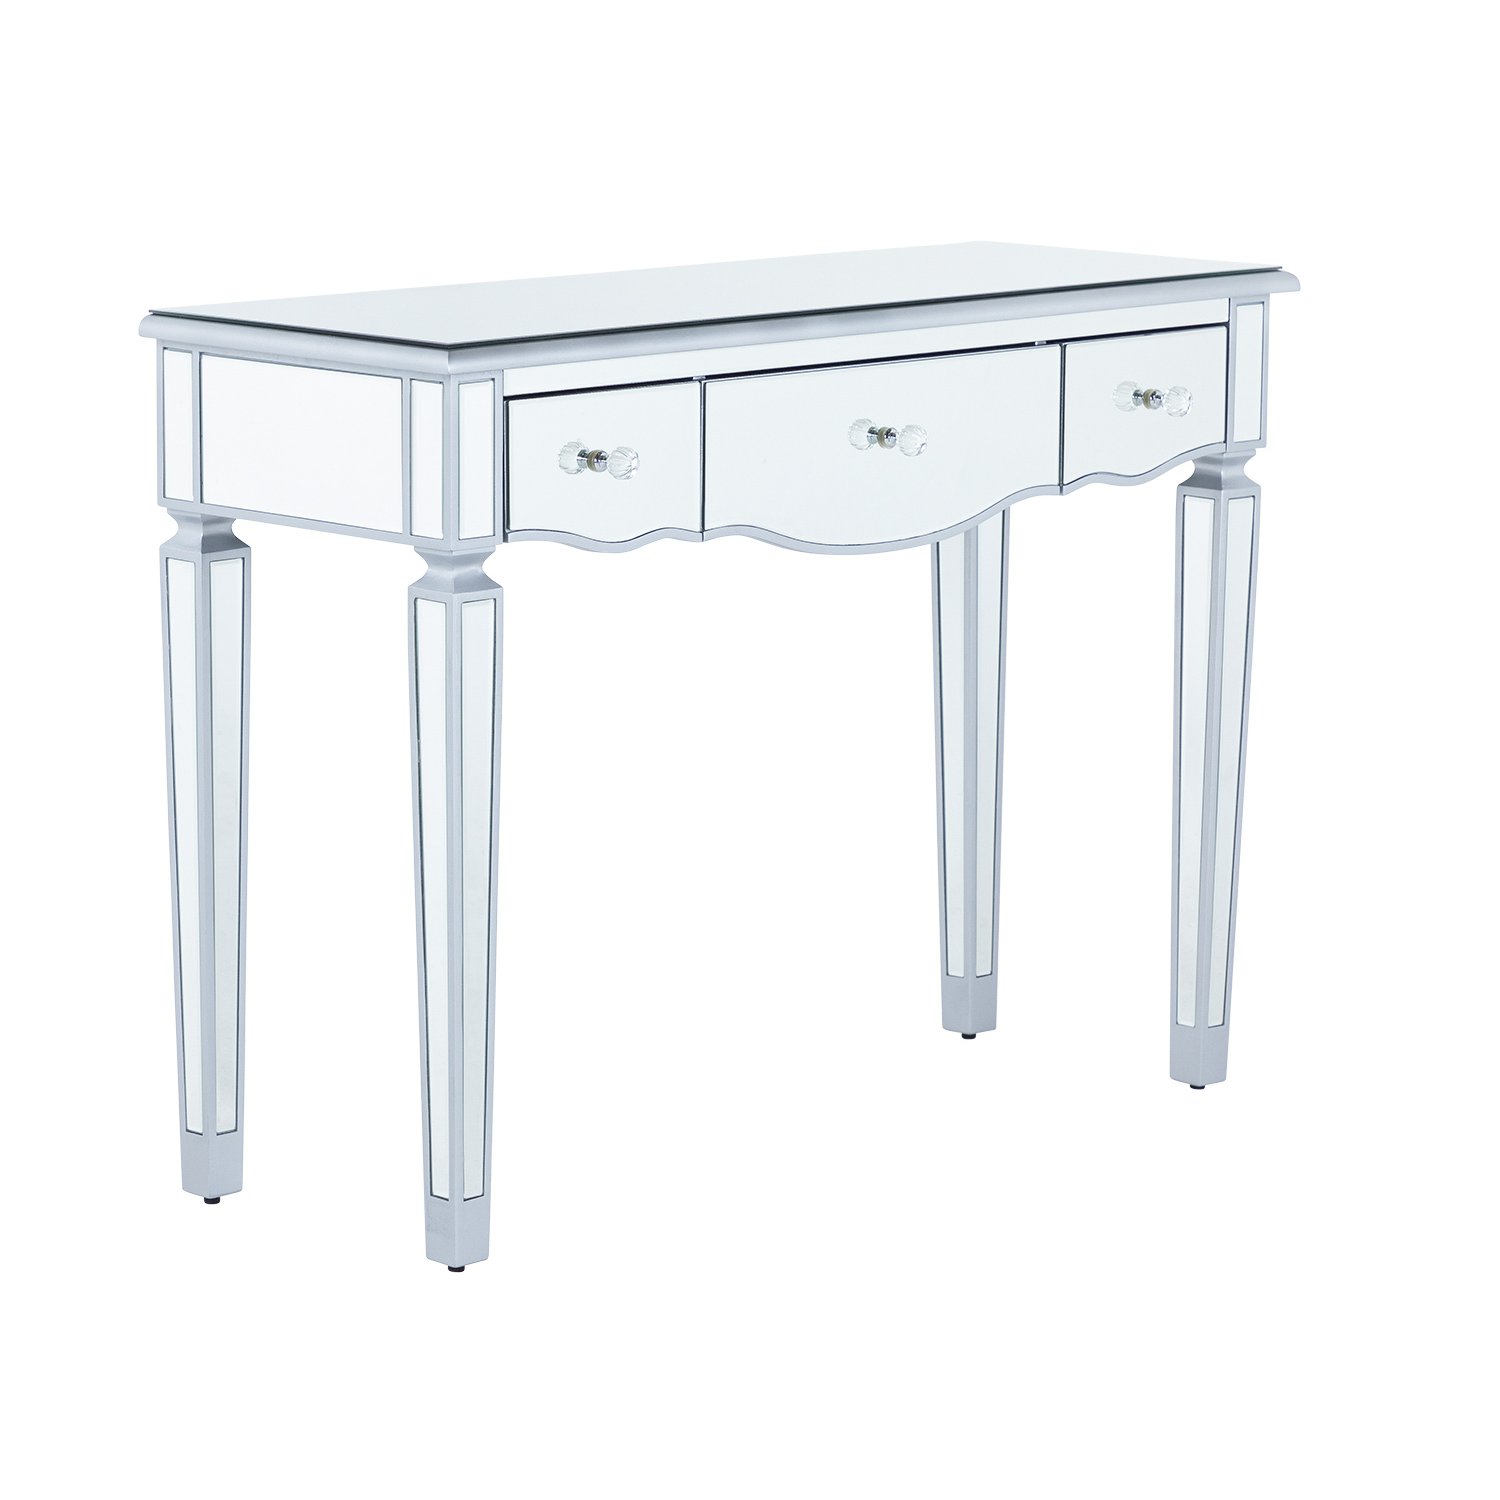 Silver Mirrored Console Table With 3 Drawers - Paris - image 1